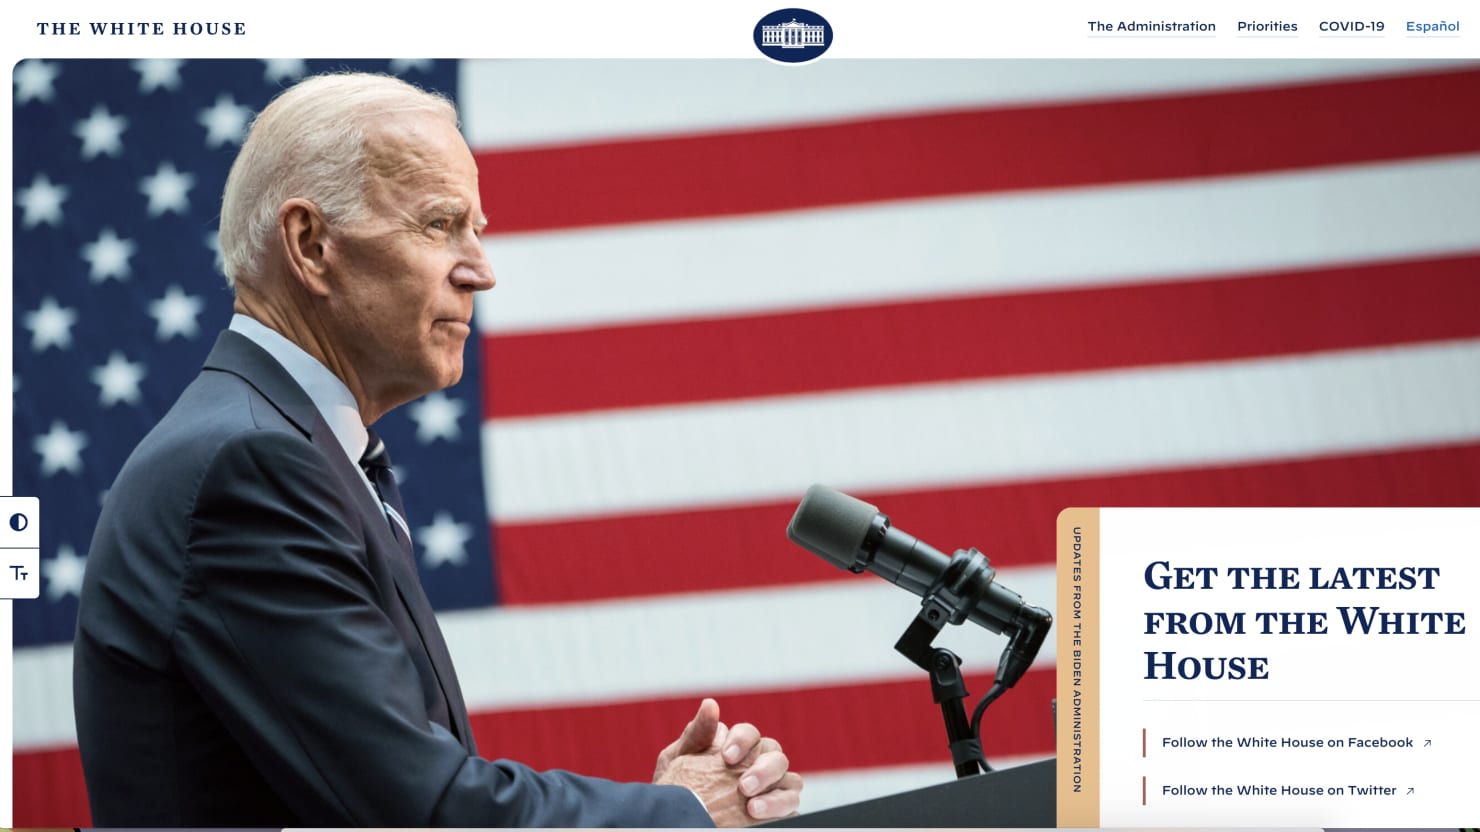 1776 commission page removed from the White House website minutes after Biden took office